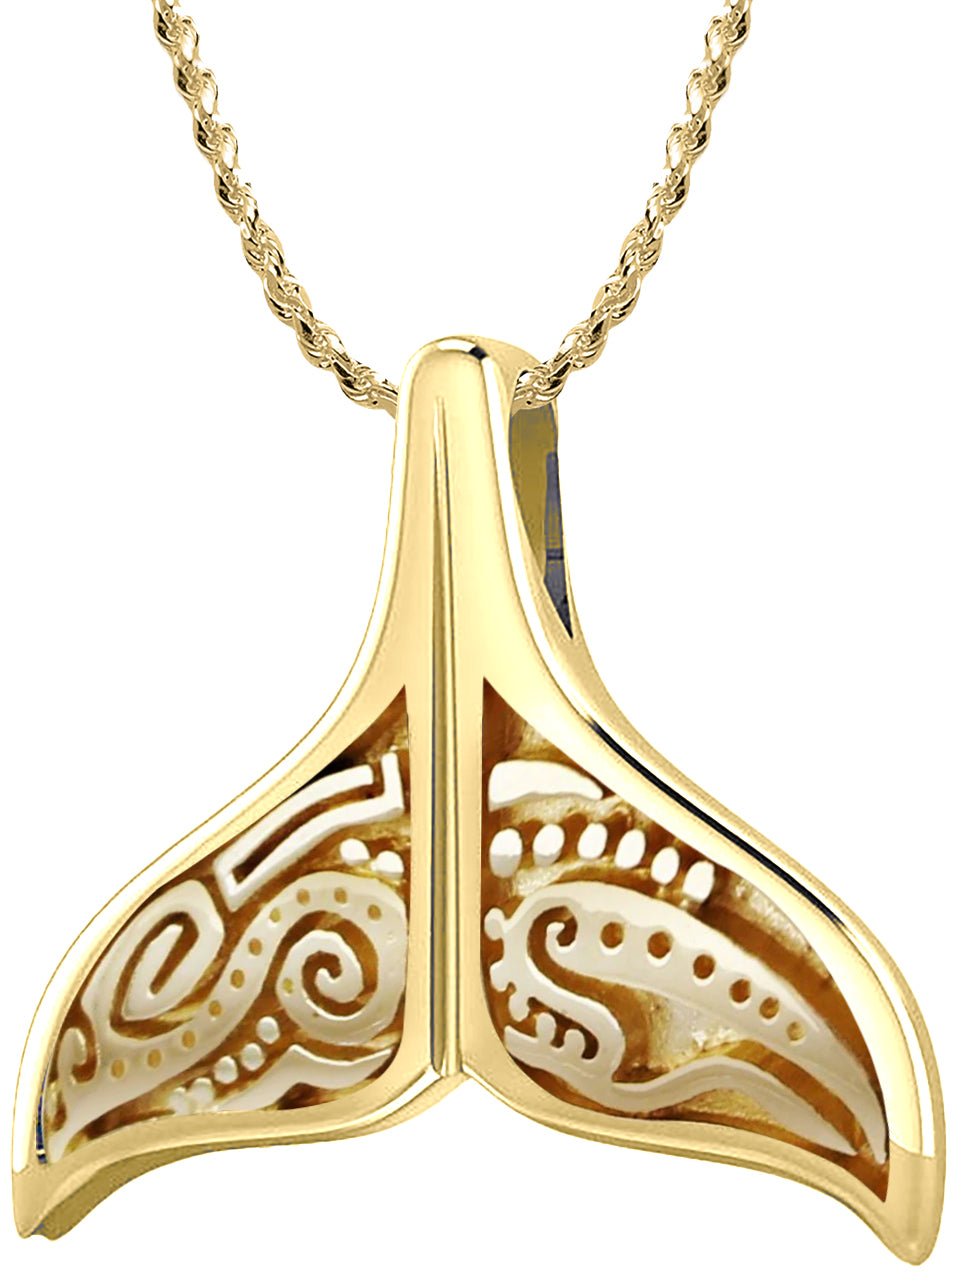 Solid 14k Yellow Gold Aboriginal Whale Tail Aquatic Charm Pendant Necklace - US Jewels